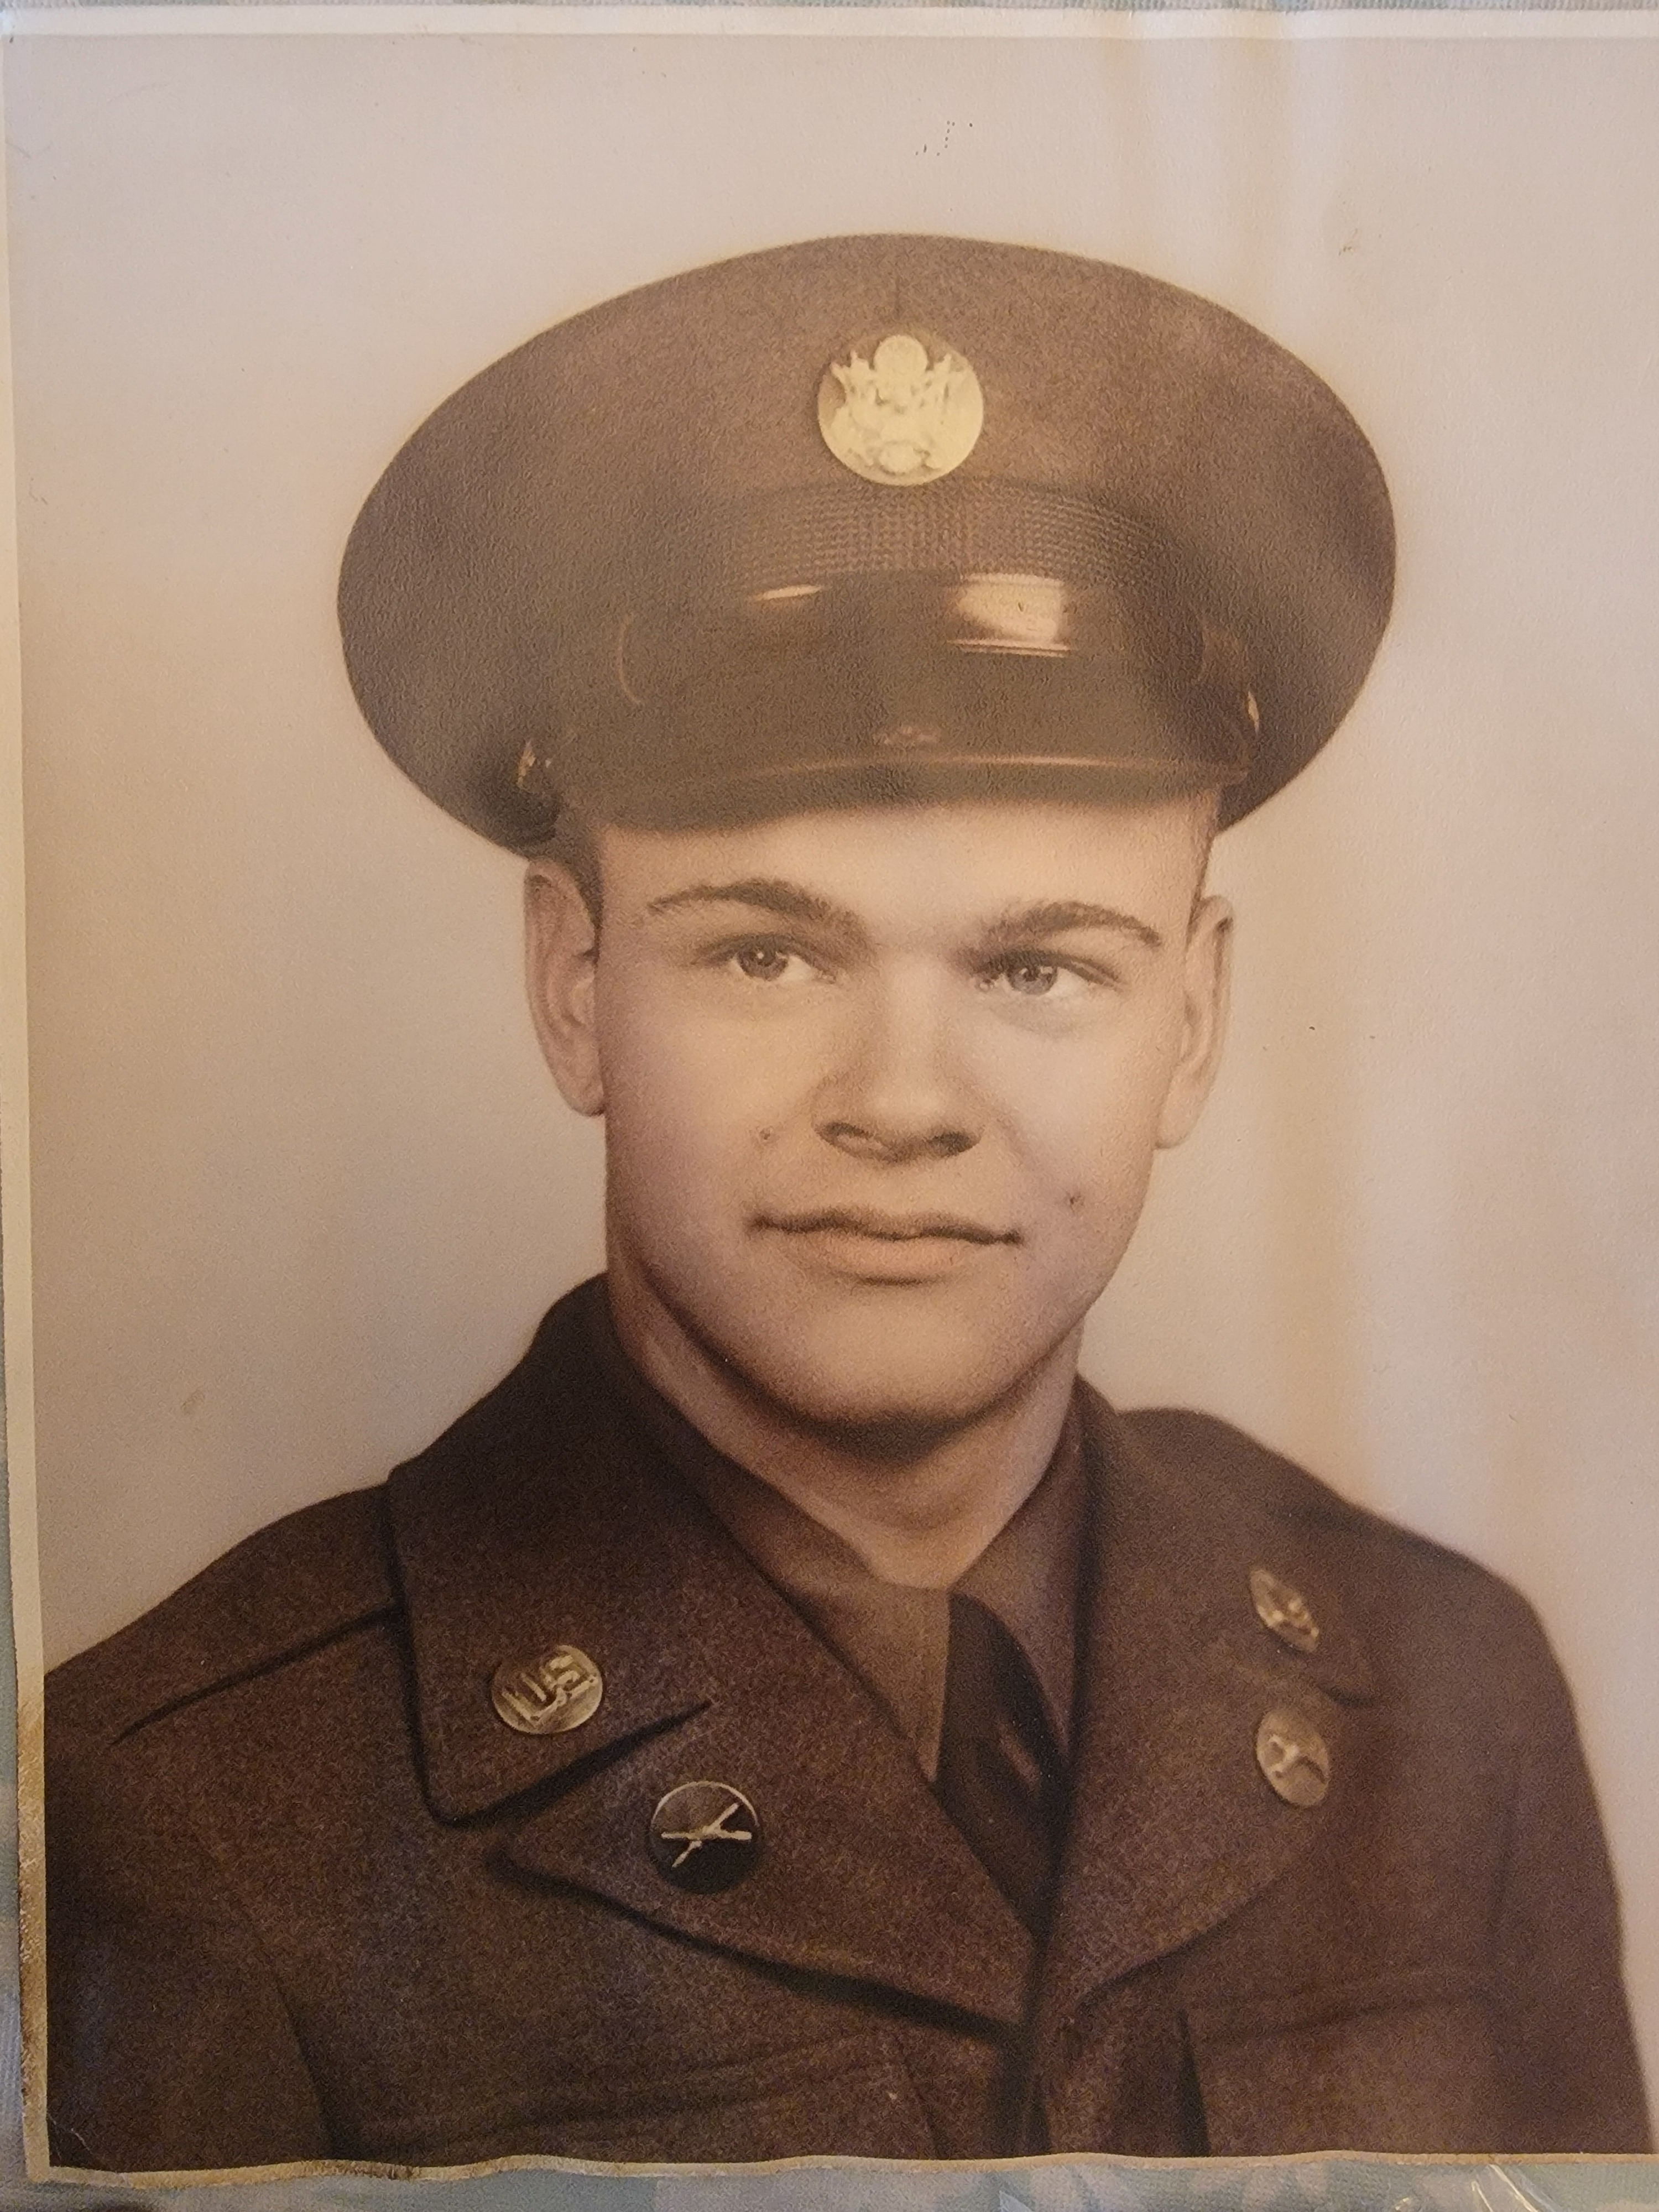 Remains of Michigan soldier killed in Korean War have been identified, military says 